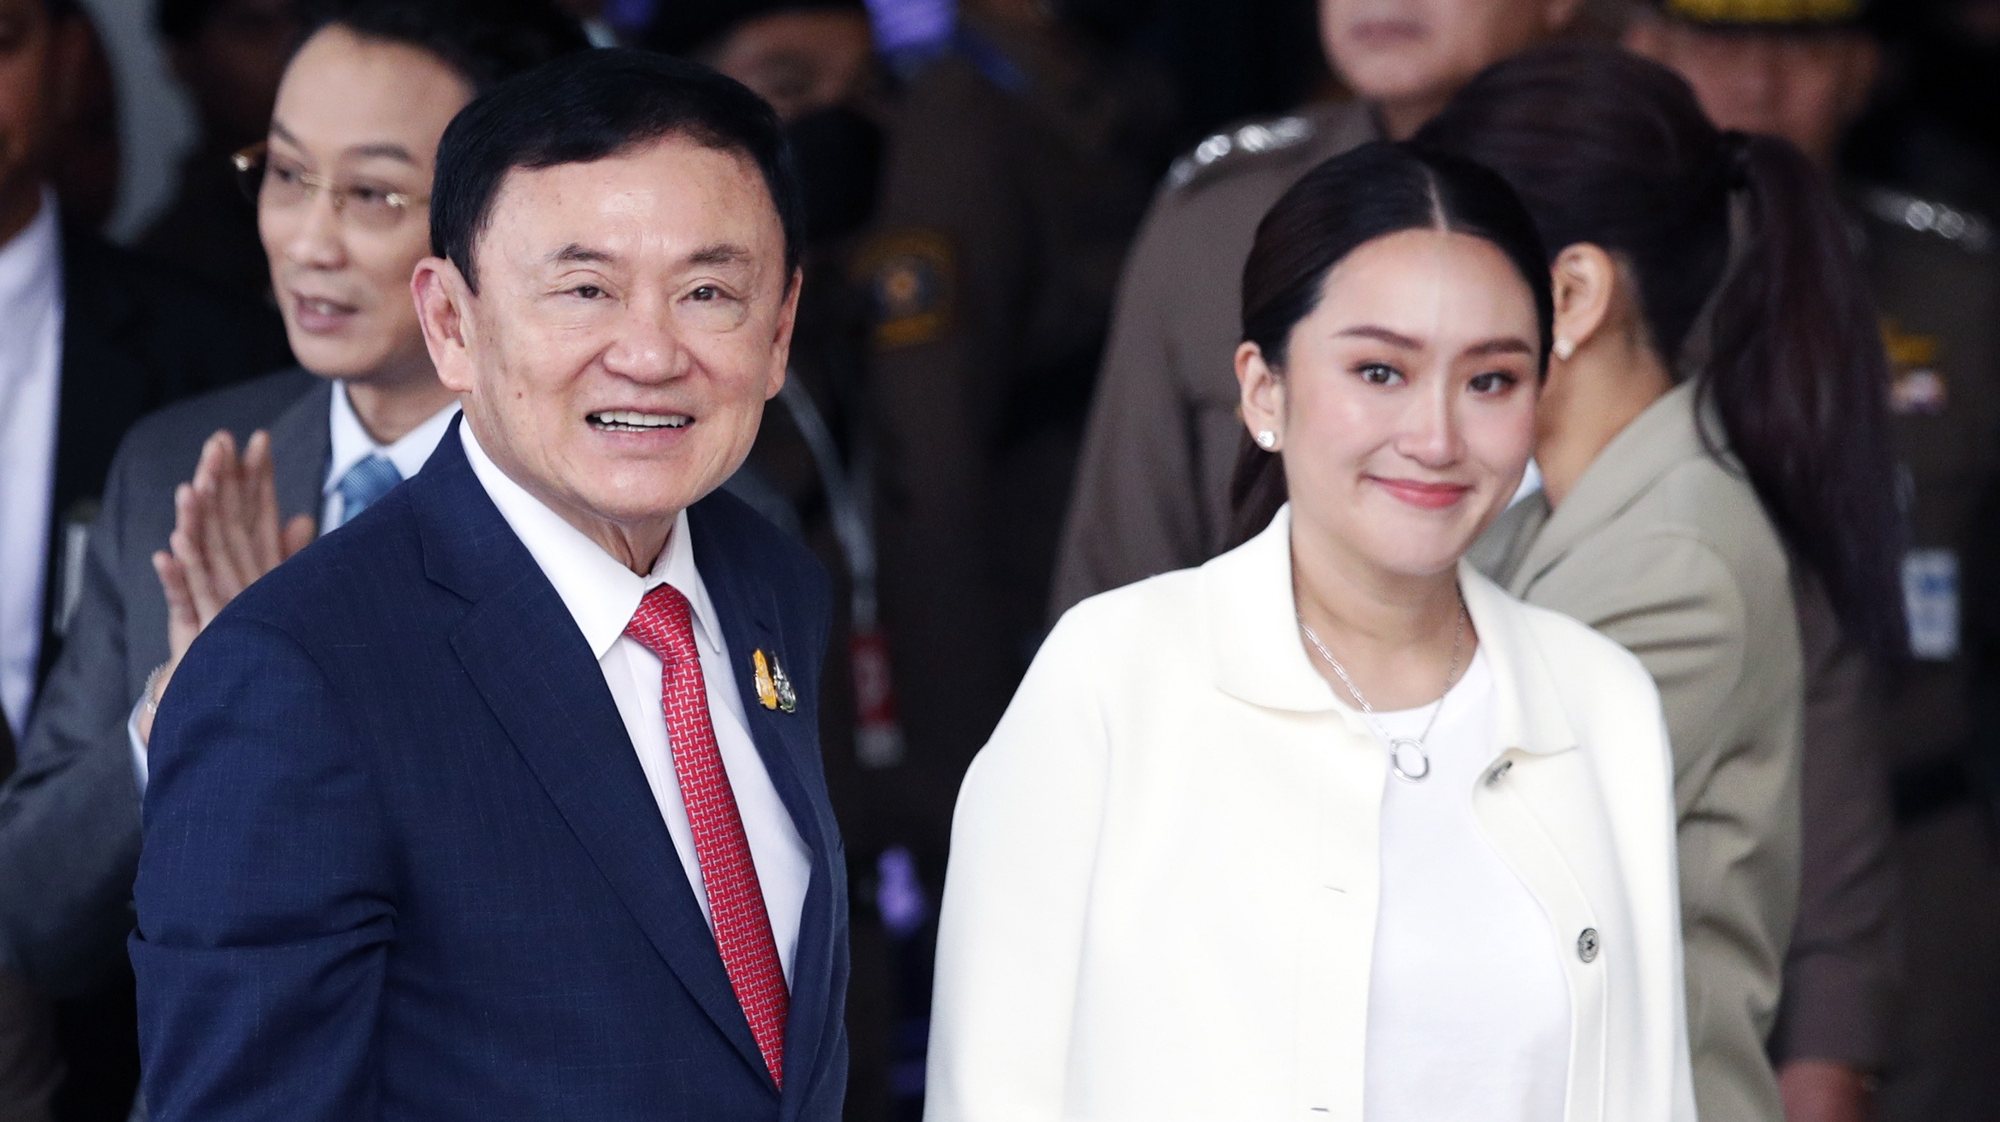 epa10812952 Former Thai prime minister Thaksin Shinawatra smiles next to his daughter and Pheu Thai Party prime ministerial candidate Paetongtarn Shinawatra upon his arrival at Don Mueang airport in Bangkok, Thailand, 22 August 2023. Shinawatra returned to Thailand after living in self-imposed exile for 15 years, following his overthrowing by a military coup on 19 September 2006. The former prime minister is expected to face imprisonment with a combined jail term of five years.  EPA/RUNGROJ YONGRIT